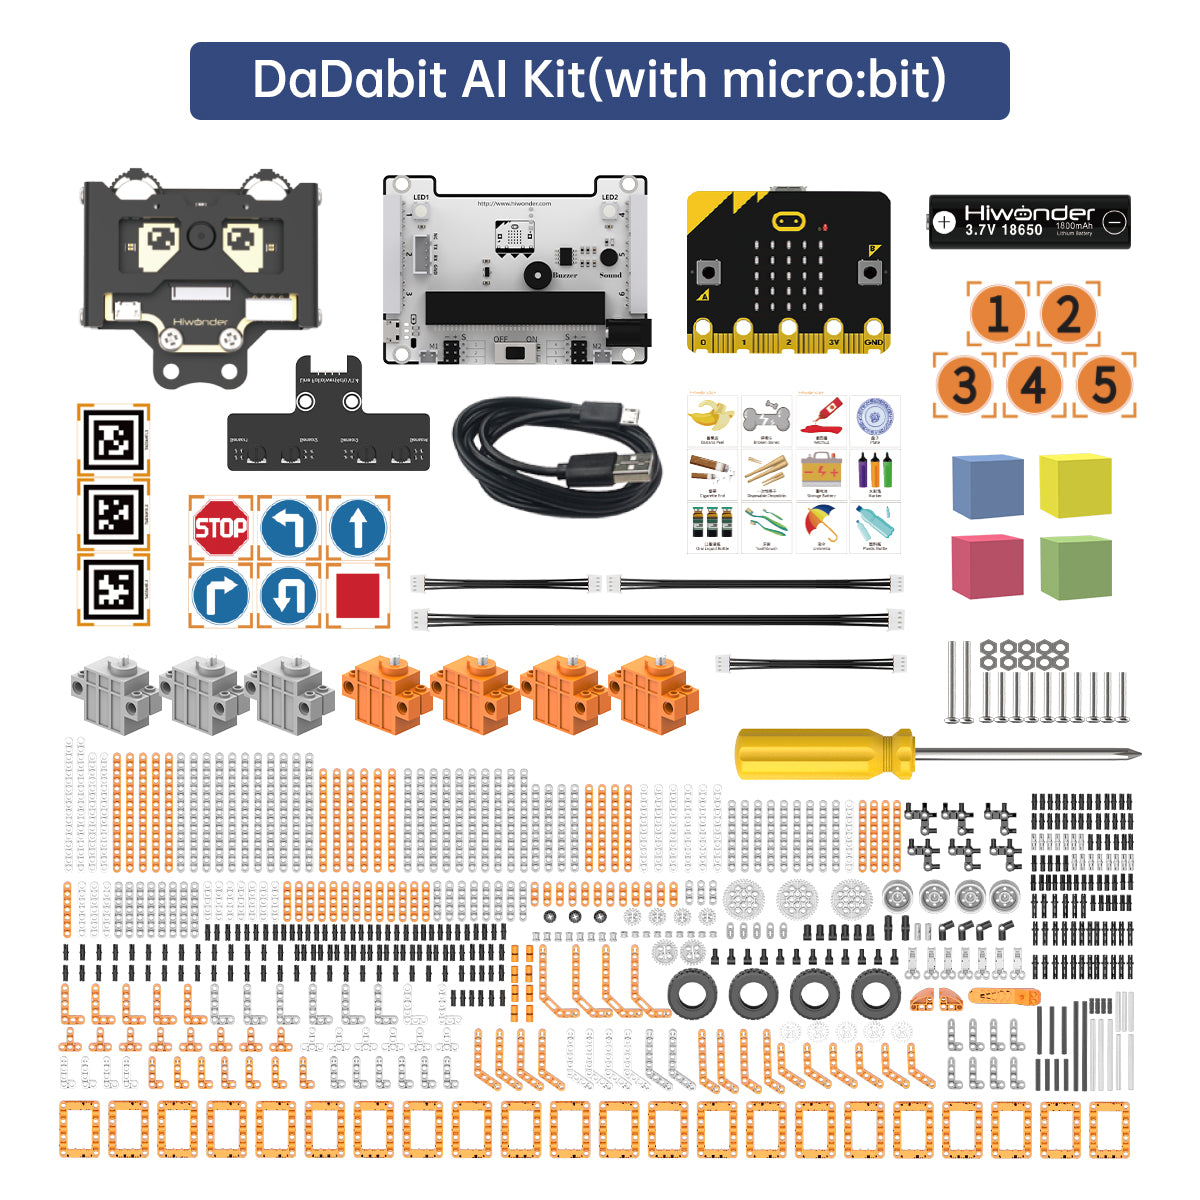 DaDa:bit AI Programmable Building Block Kit Powered by micro:bit with WonderCam AI Vision Module Supports Sensor Expansion